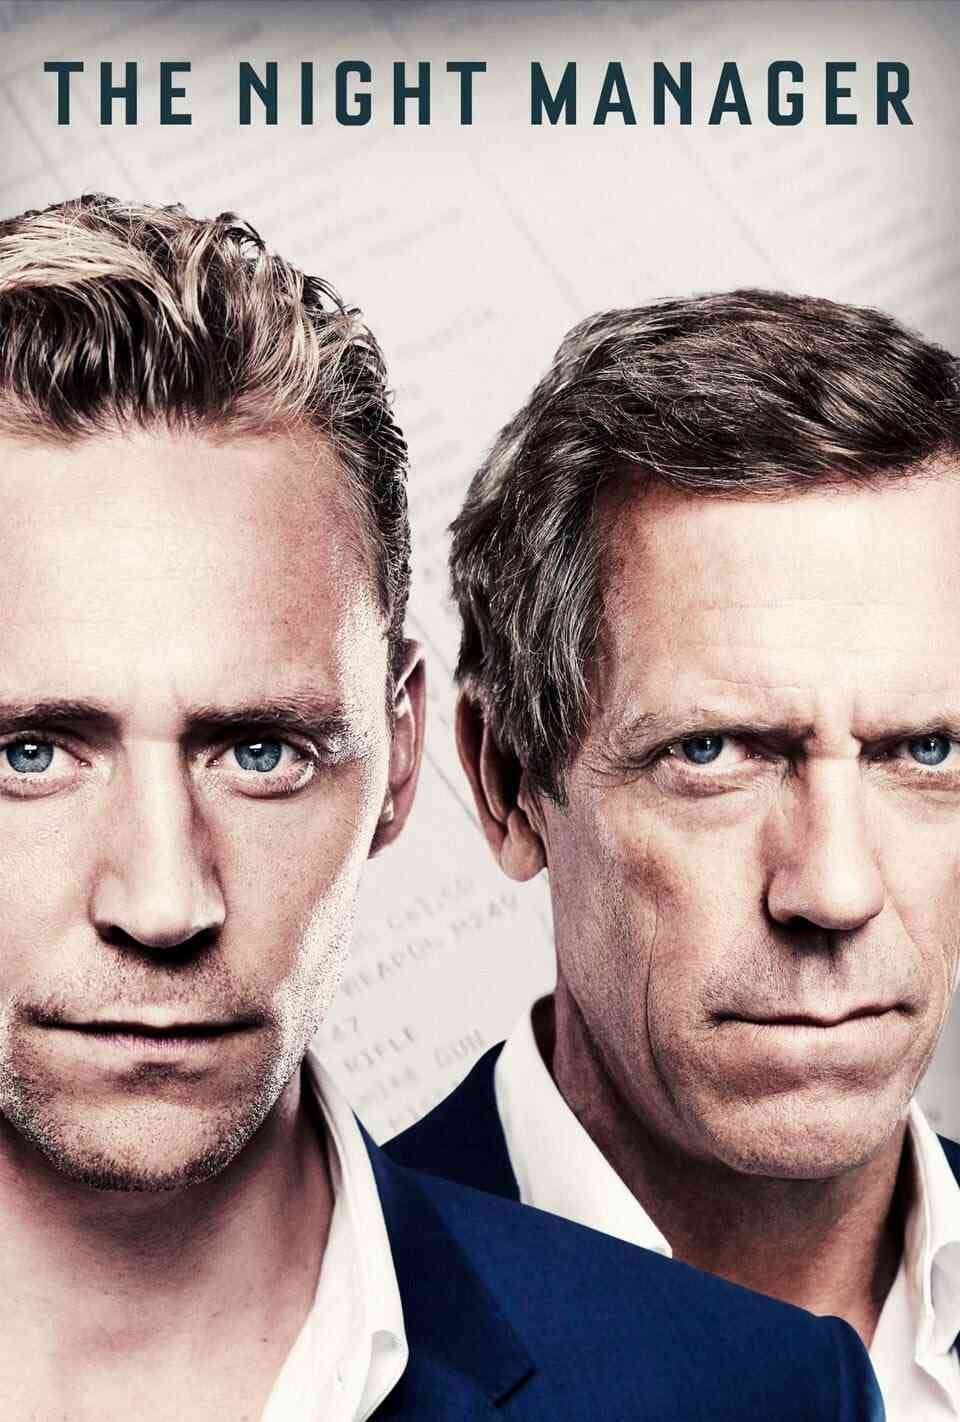 Read The Night Manager screenplay.